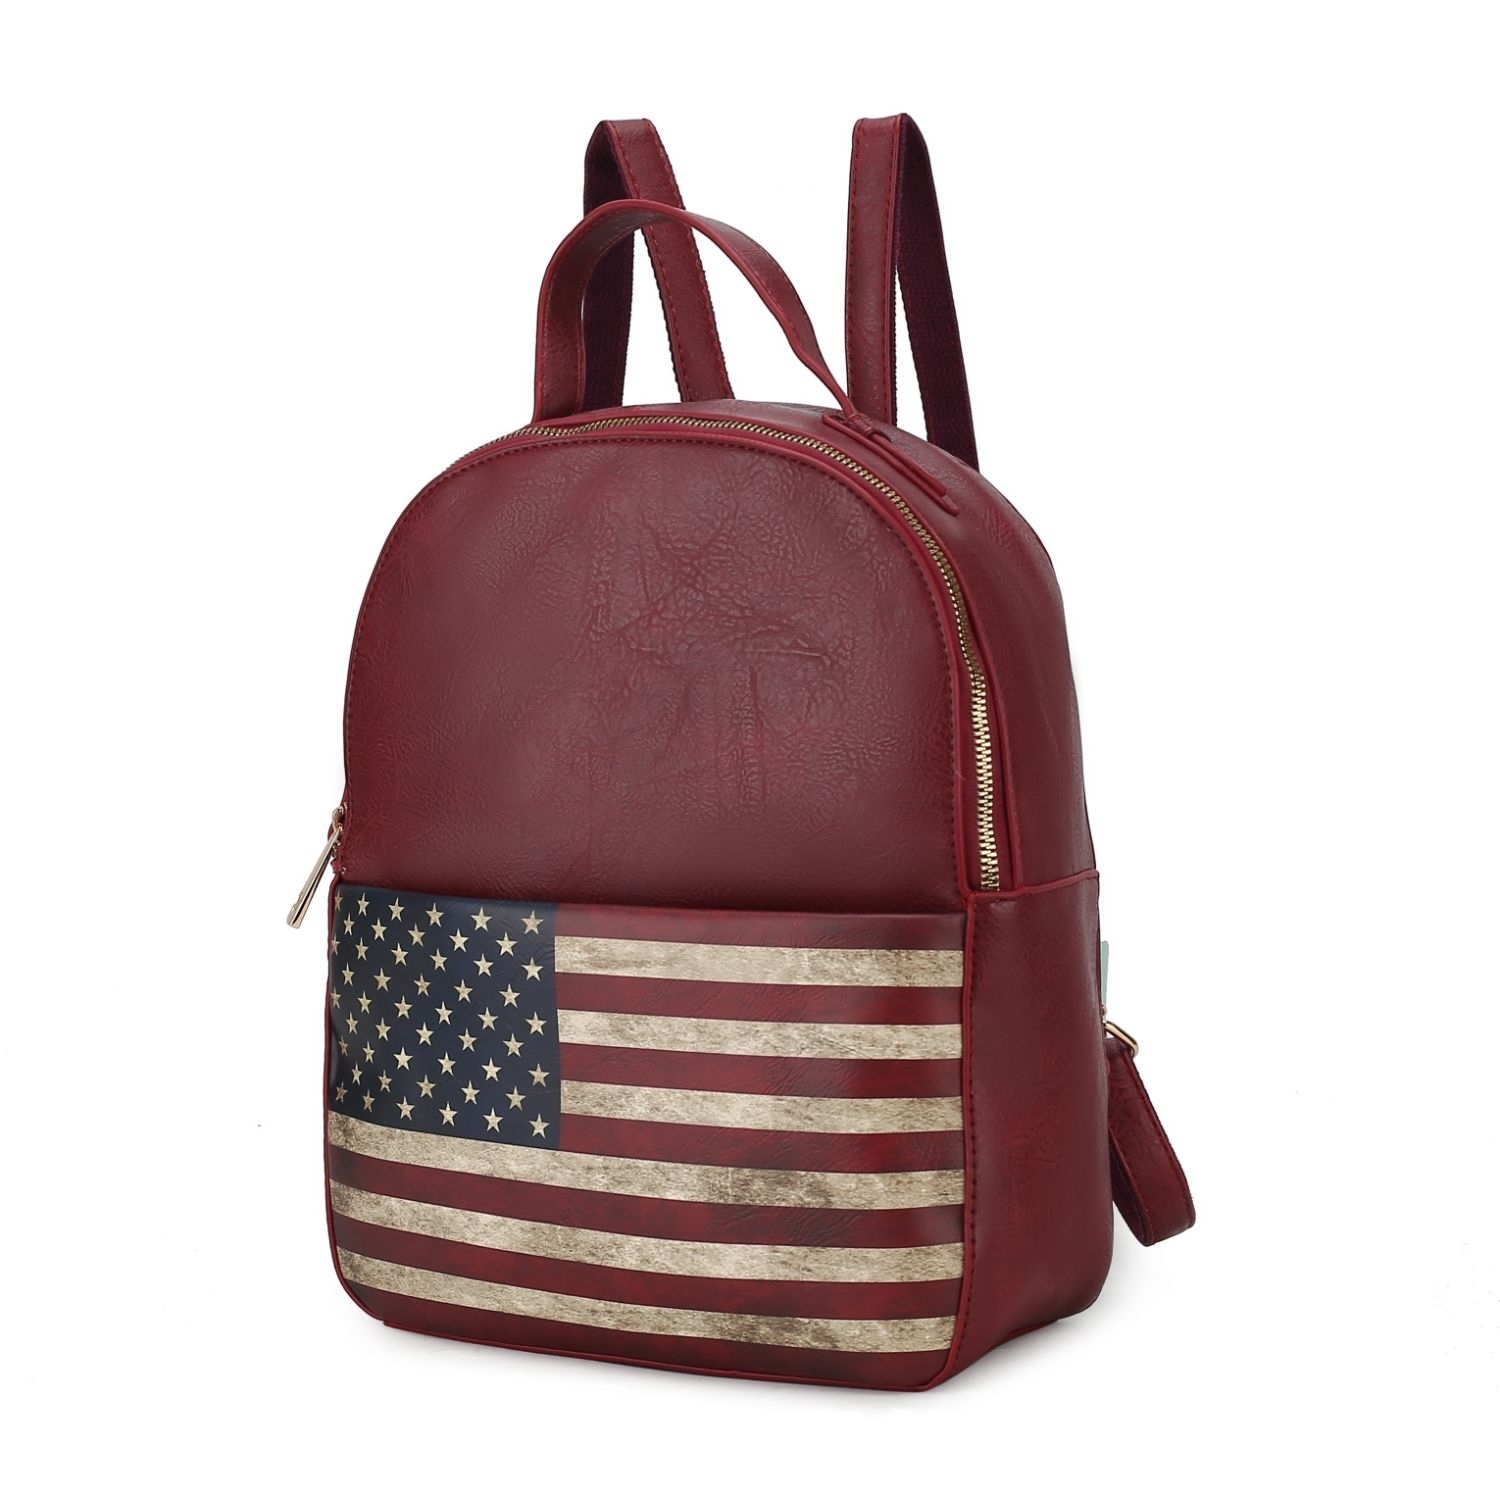 MKF Collection Briella Vegan Leather Women's FLAG Backpack By Mia K - Burgundy